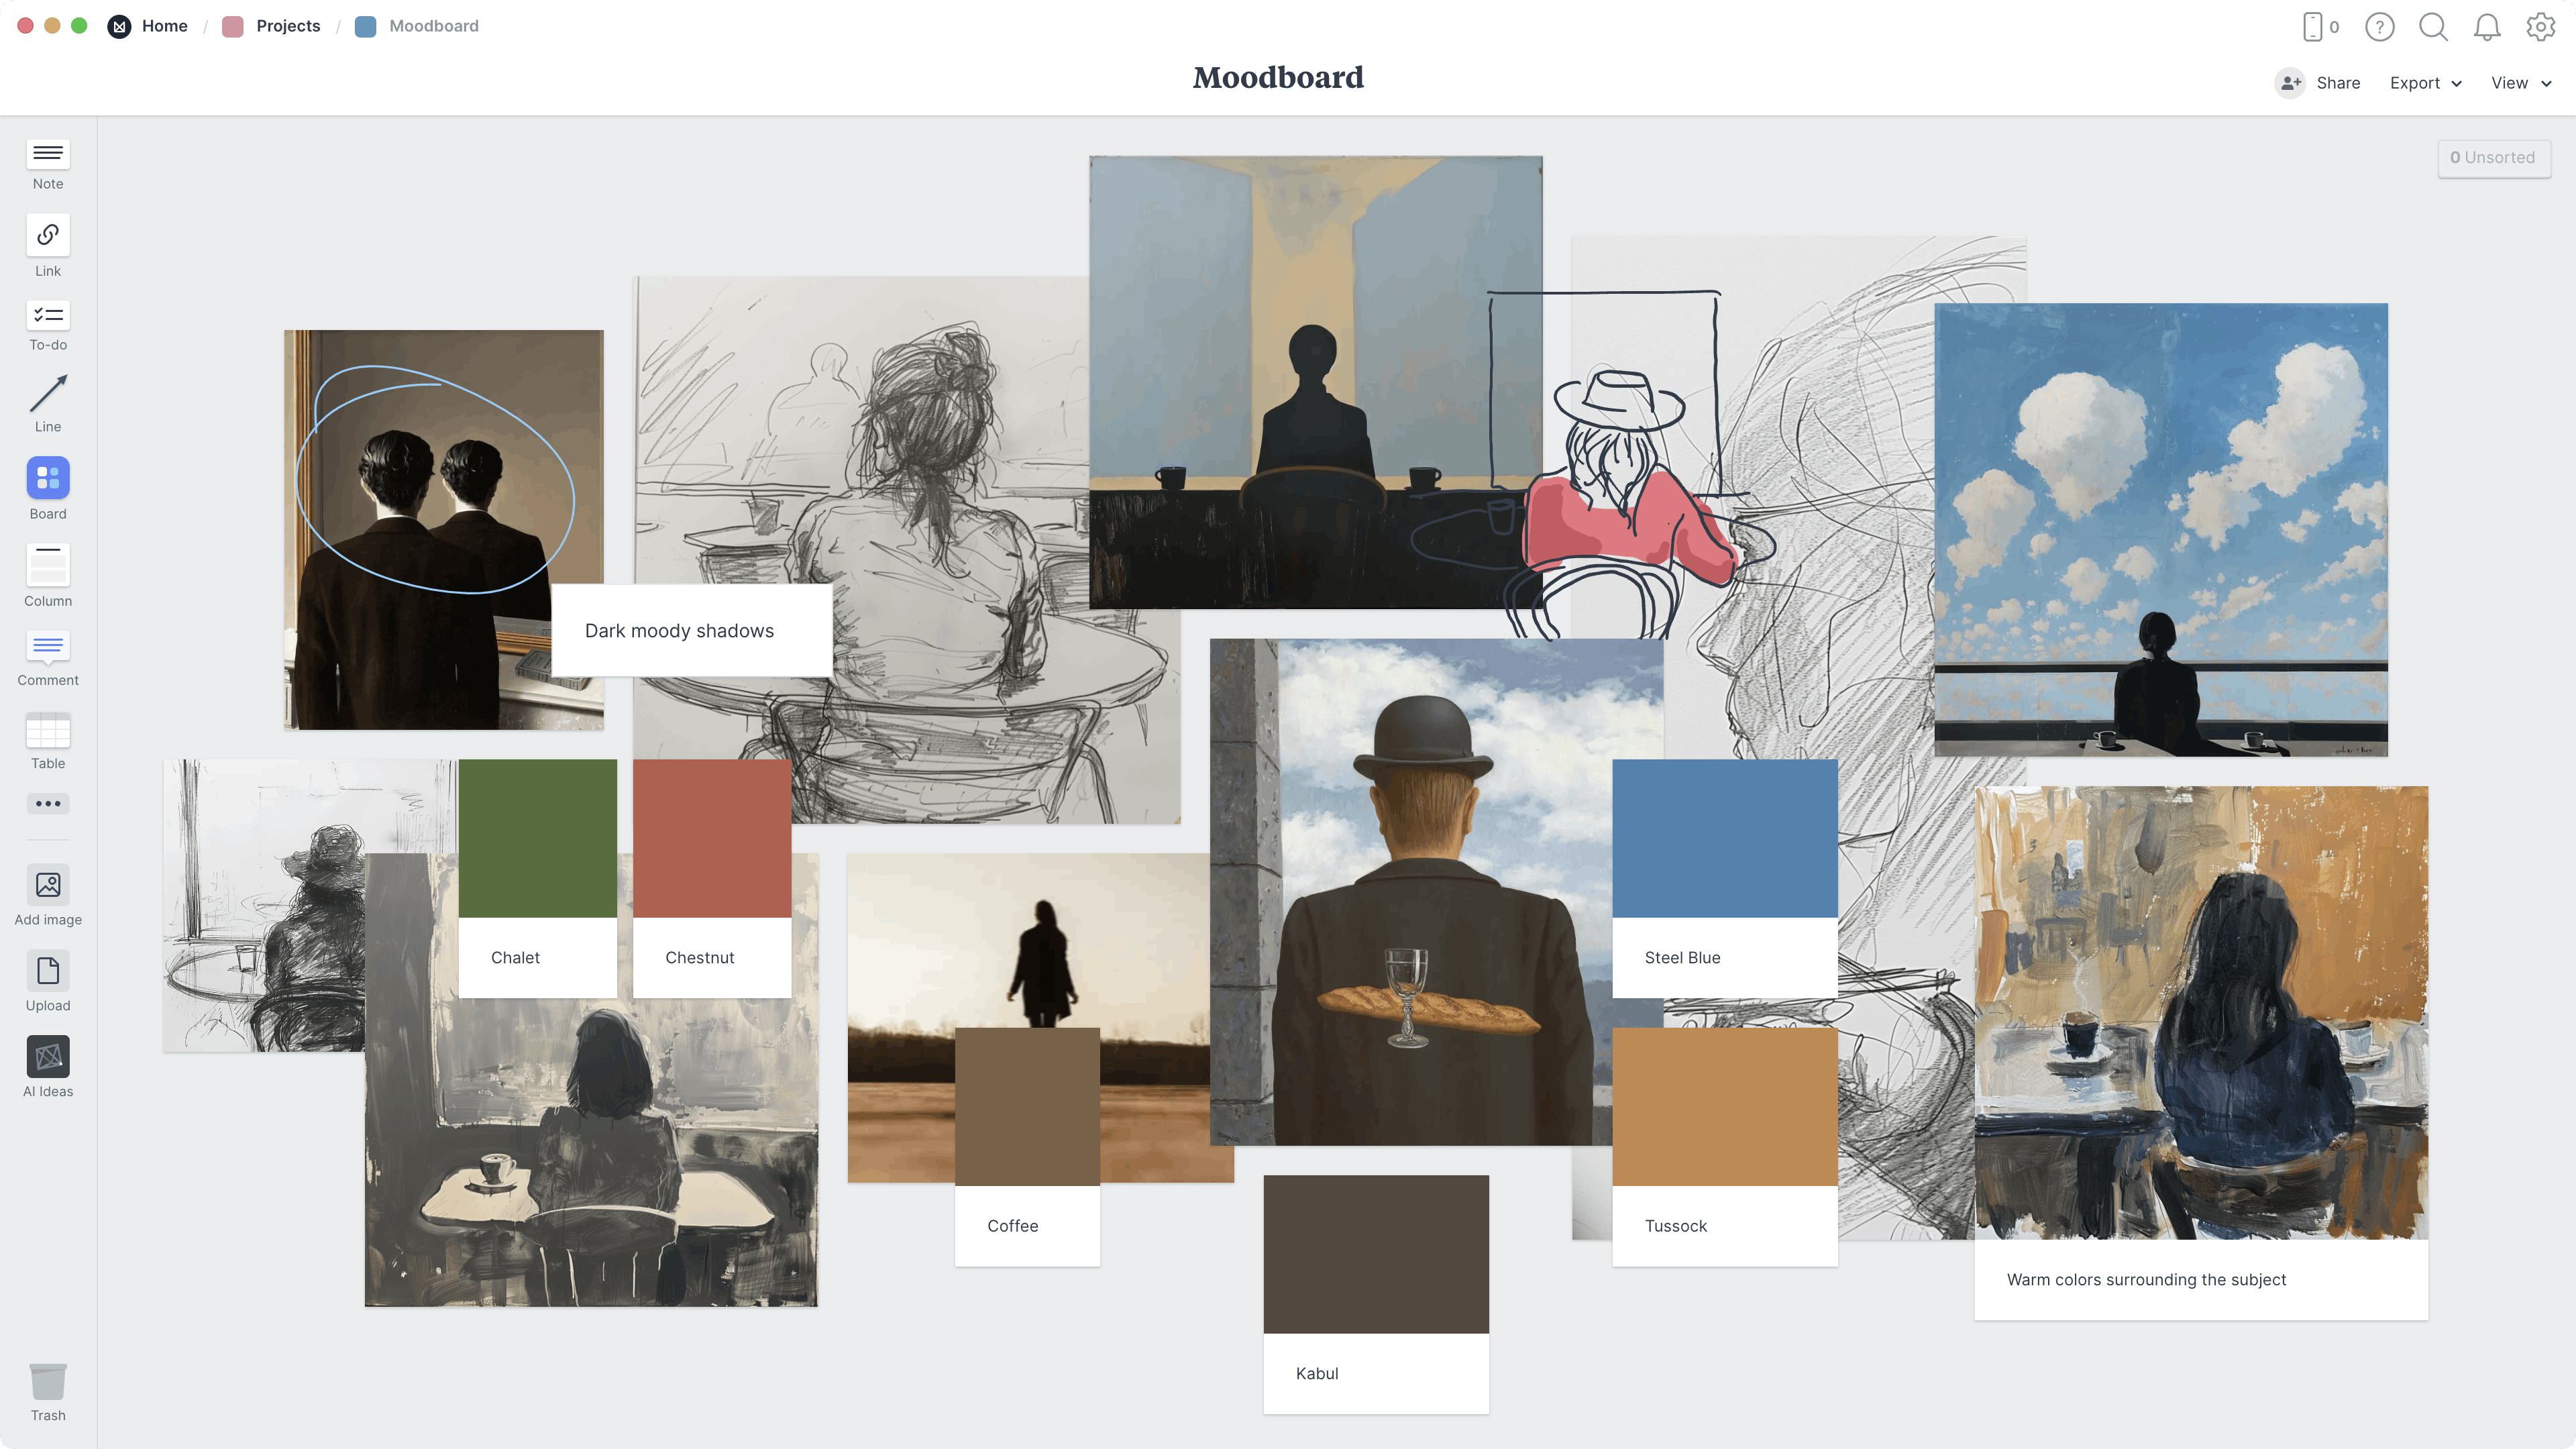 Visual Art Moodboard Template, within the Milanote app